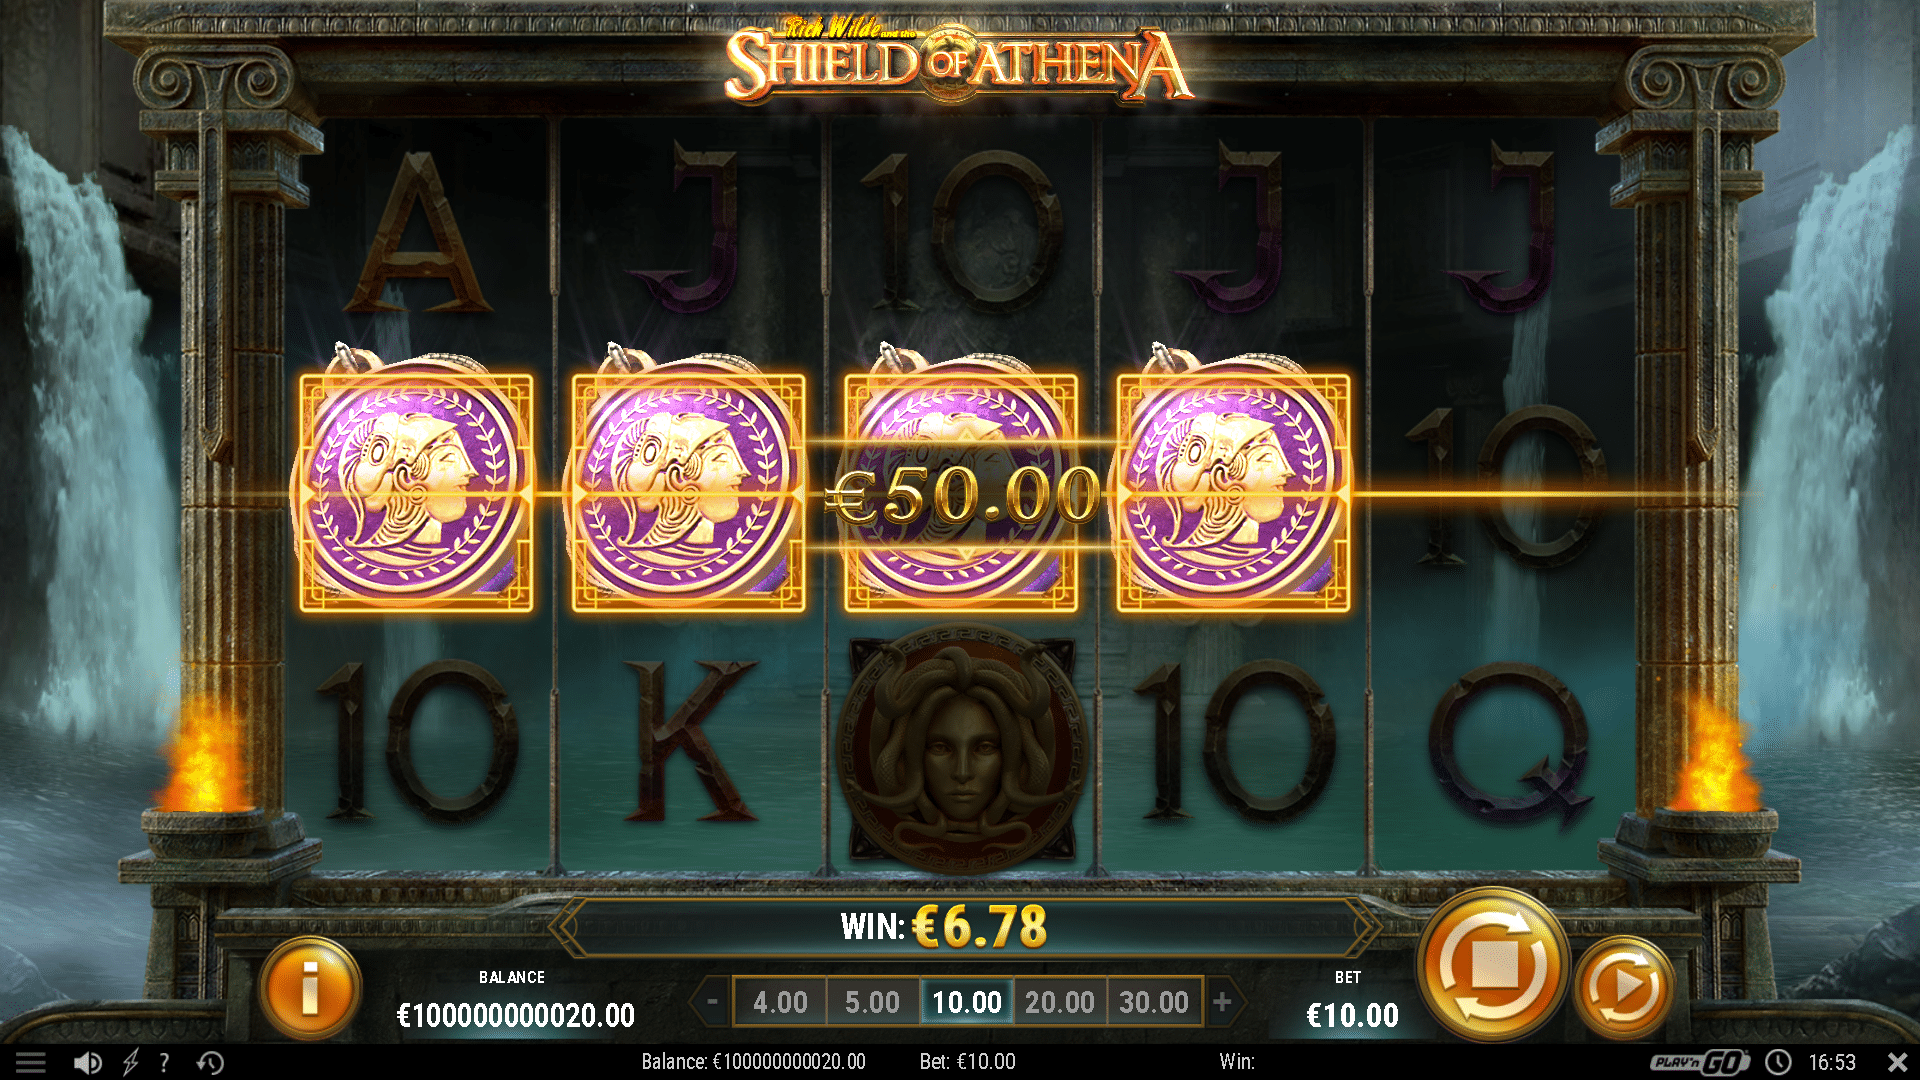 Rich Wilde and the Shield of Athena - gameplay screenshot